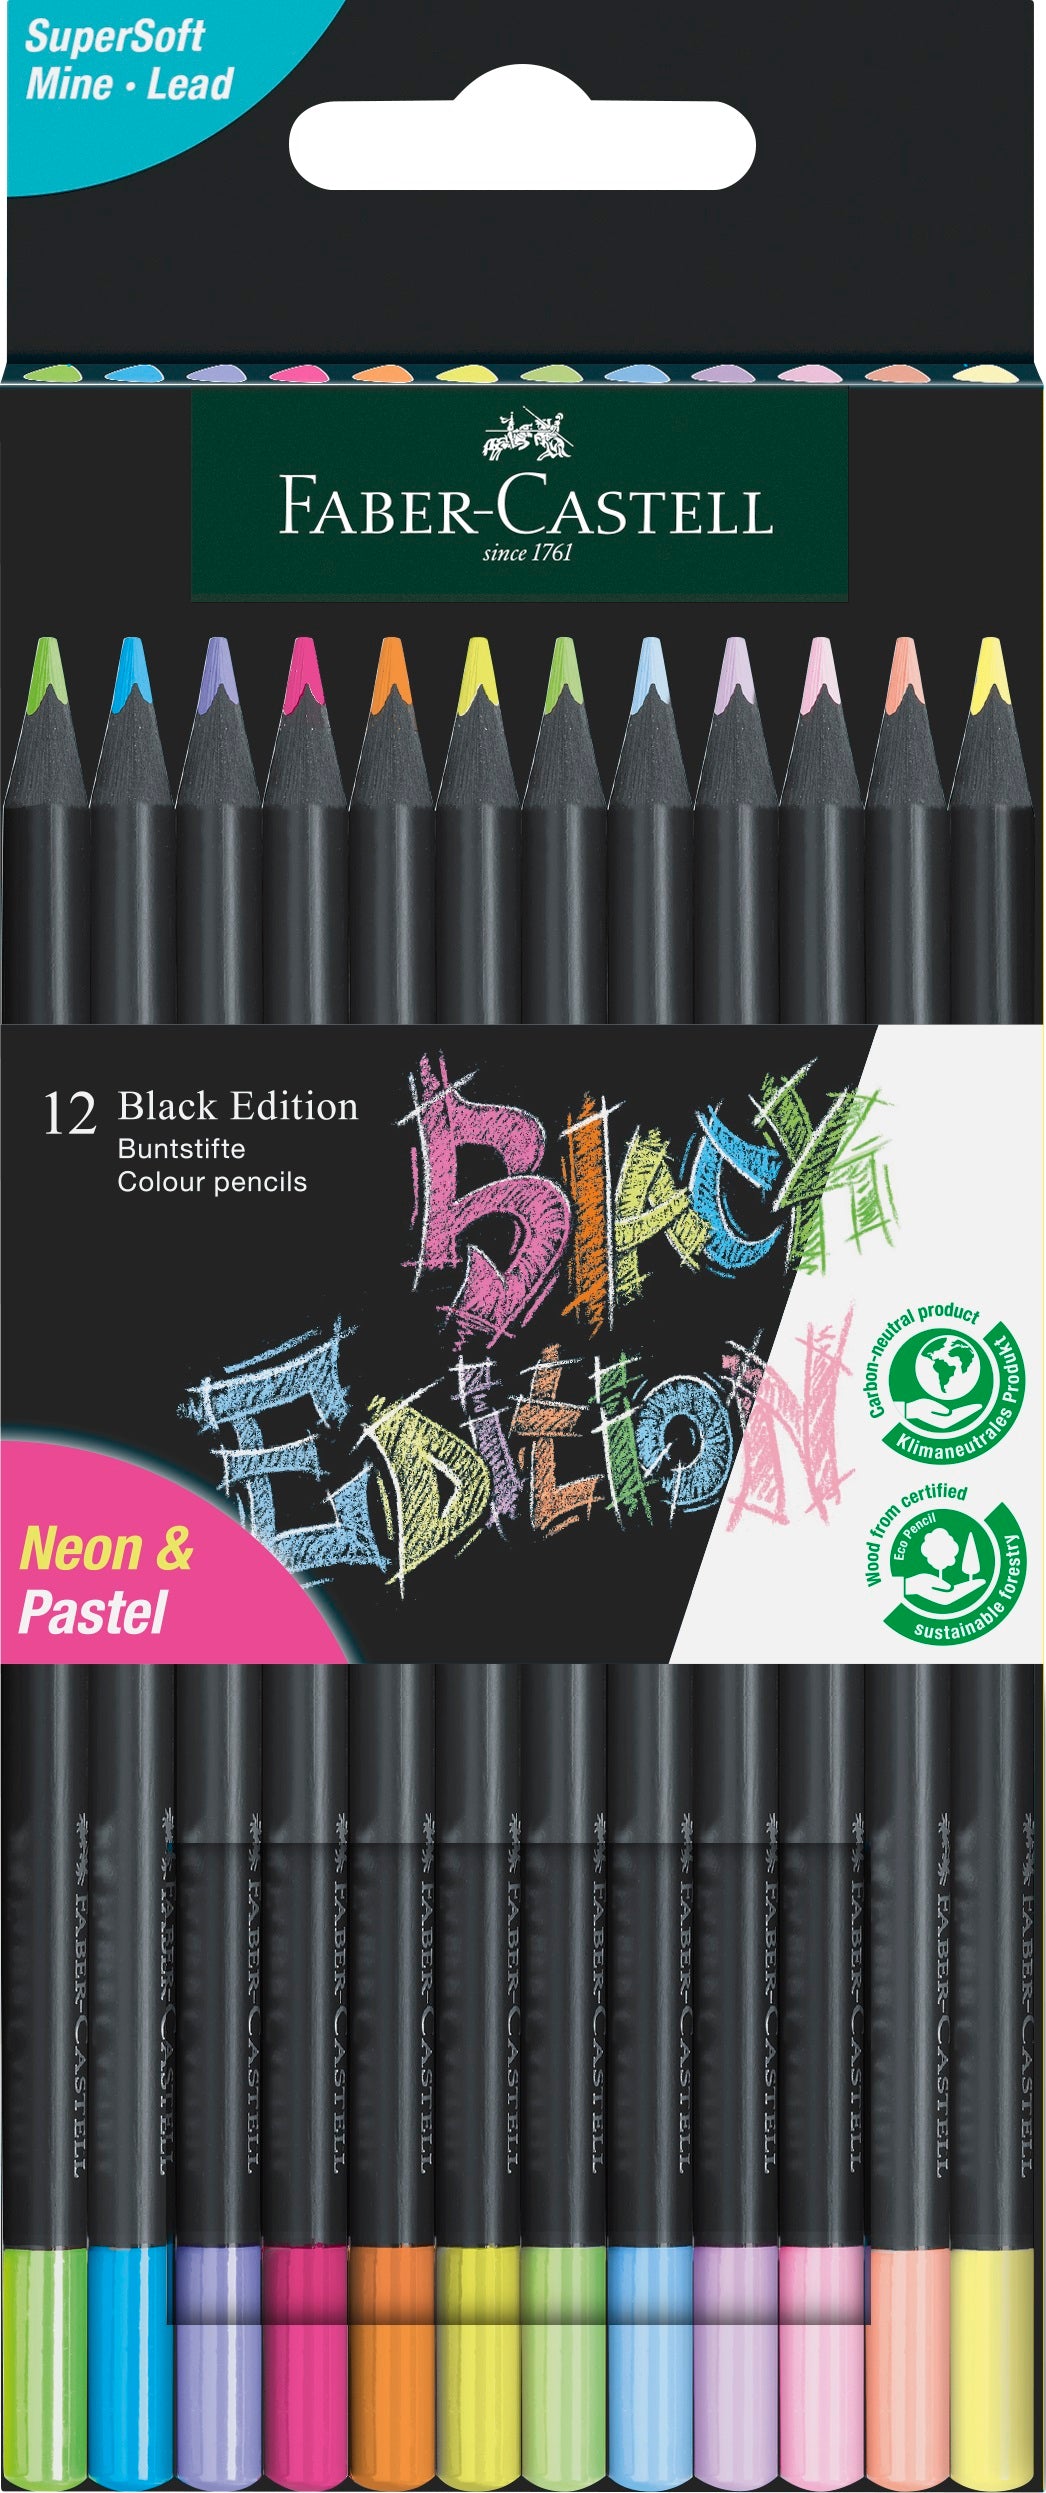 Retail packaging for a pack of 12 neon and pastel colour pencils by Faber Castell. The packaging is black with a cut out showing the pencils inside plus an illustration of them in use. 